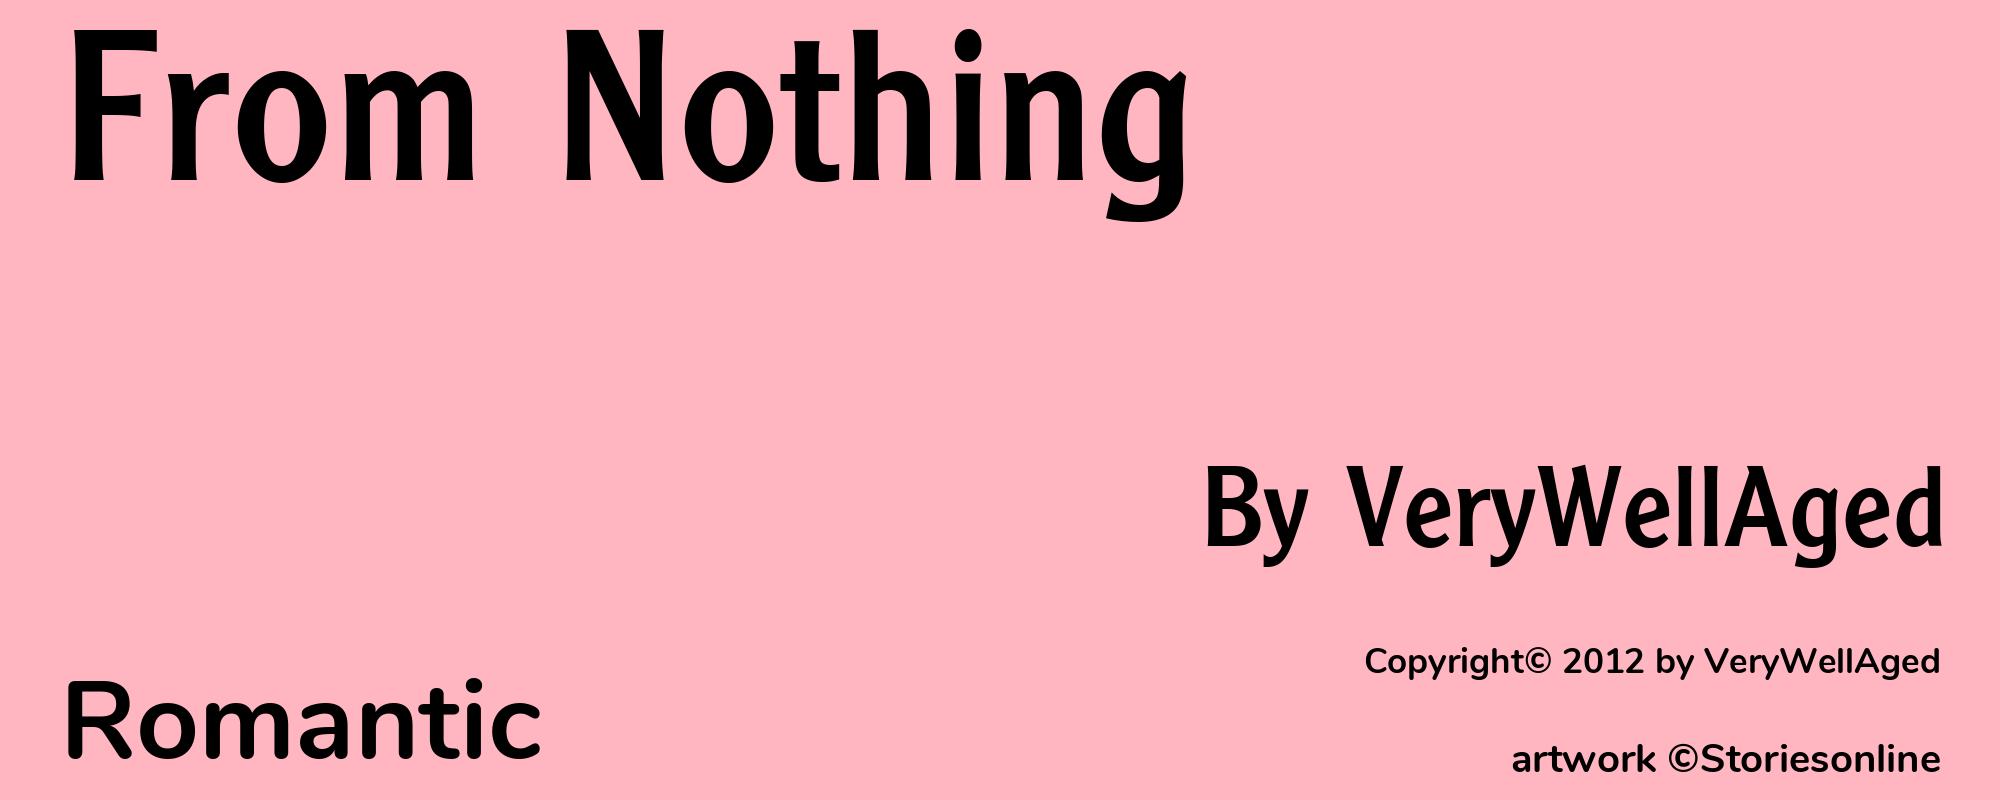 From Nothing - Cover